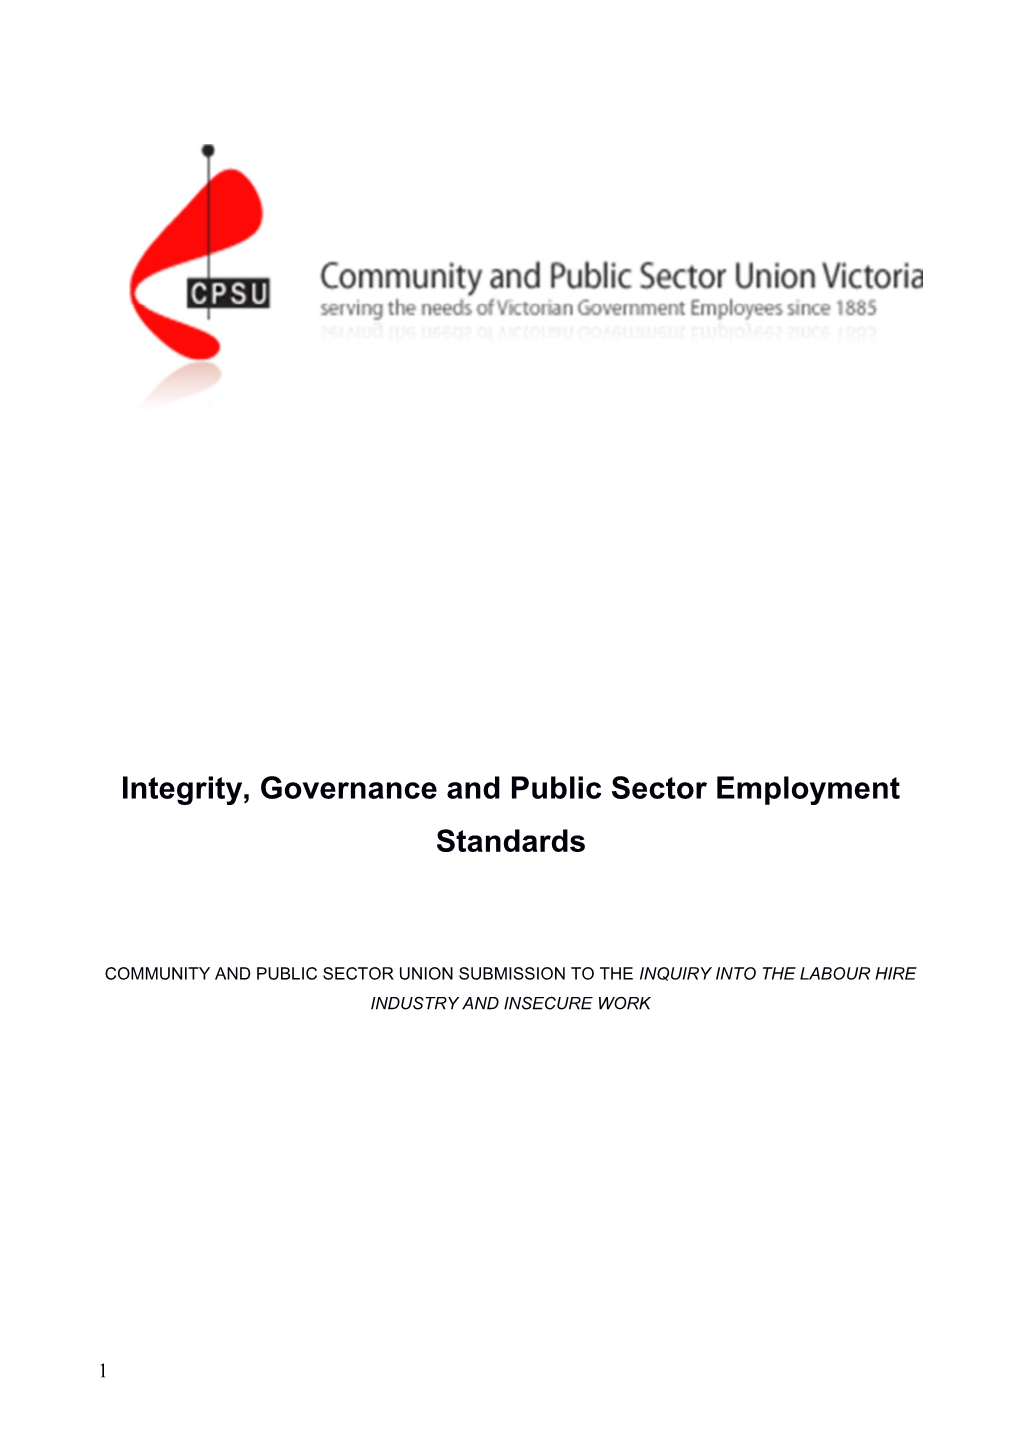 Integrity, Governance and Public Sector Employment Standards